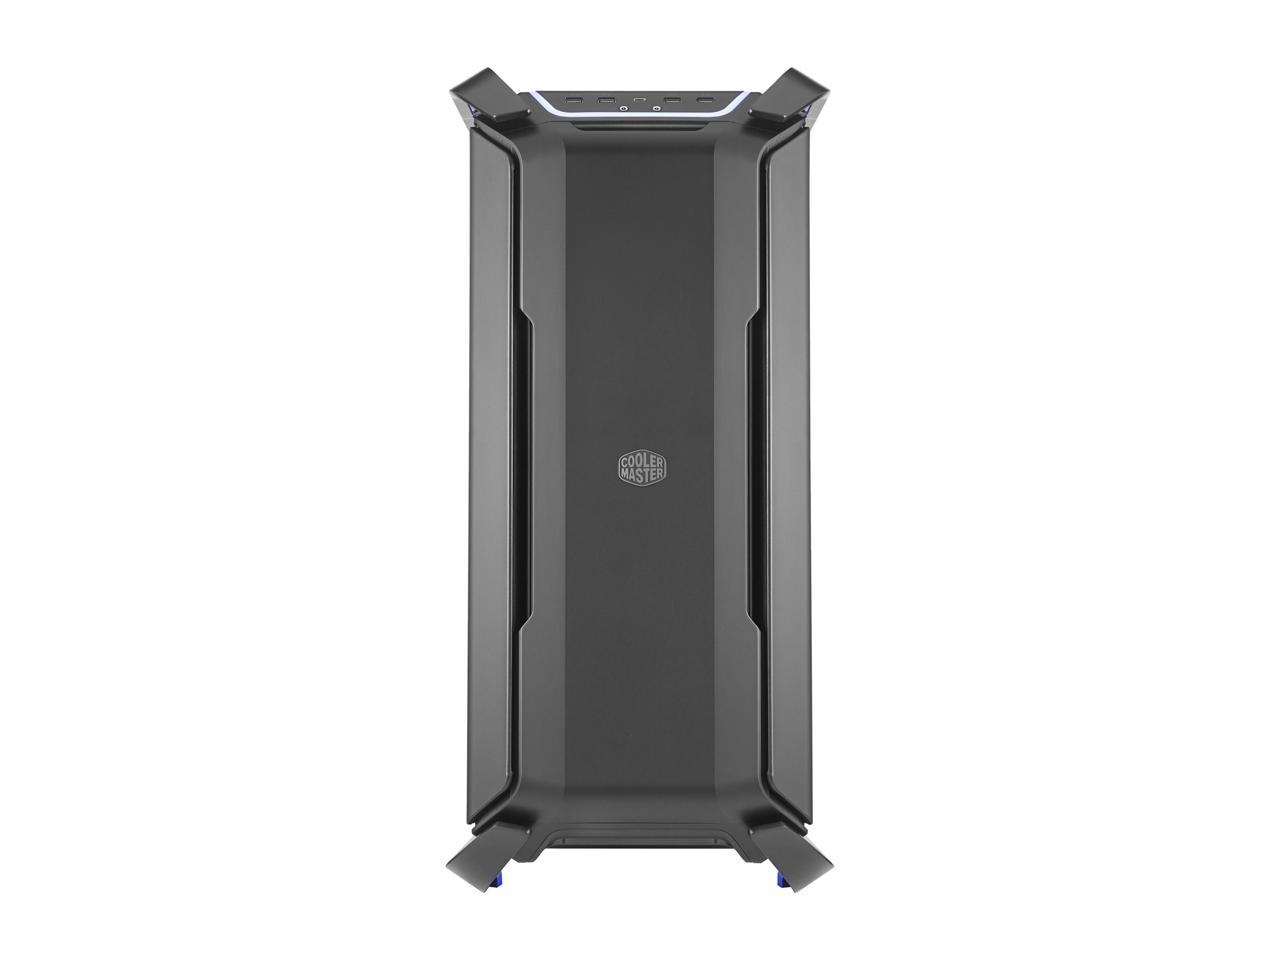 Cooler Master Cosmos C700P Black Edition E-ATX Full-Tower with Curved Tempered Glass Side Panel, Flexible Interior layout, RGB Lighting control, Type-C port and diverse liquid cooling layout